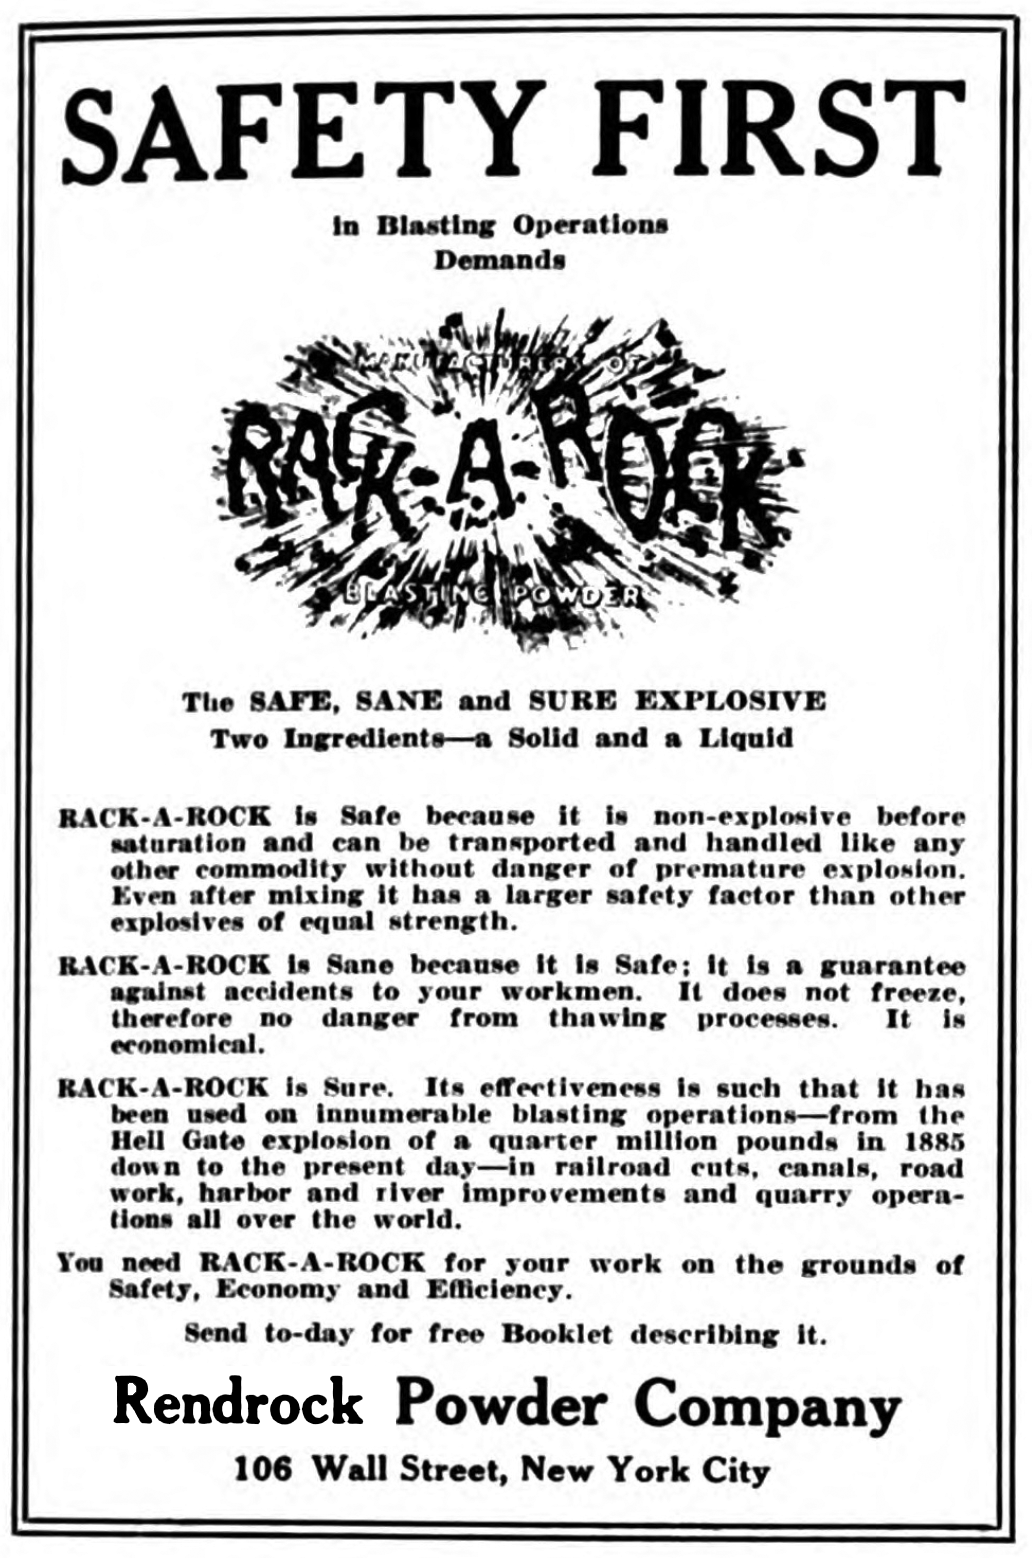 Image of an advertisement for Rack-A-Rock blasting powder